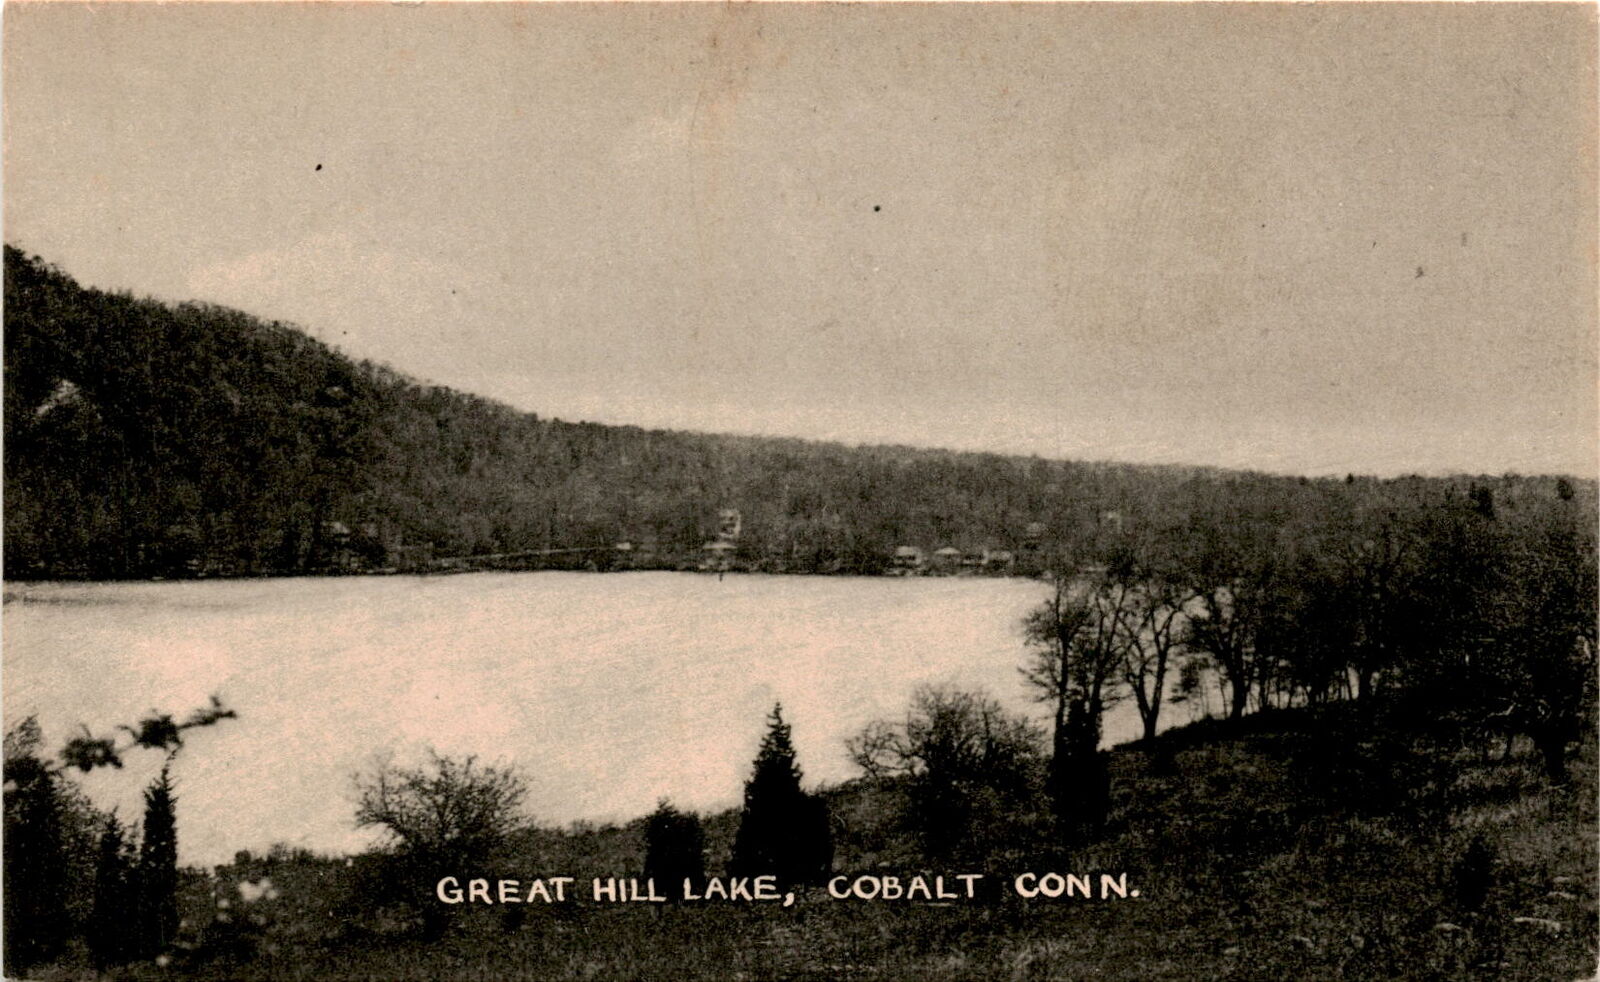 Great Hill Lake, Cobalt, Connecticut, Grandy Collection, THE COLLOTYPE Postcard